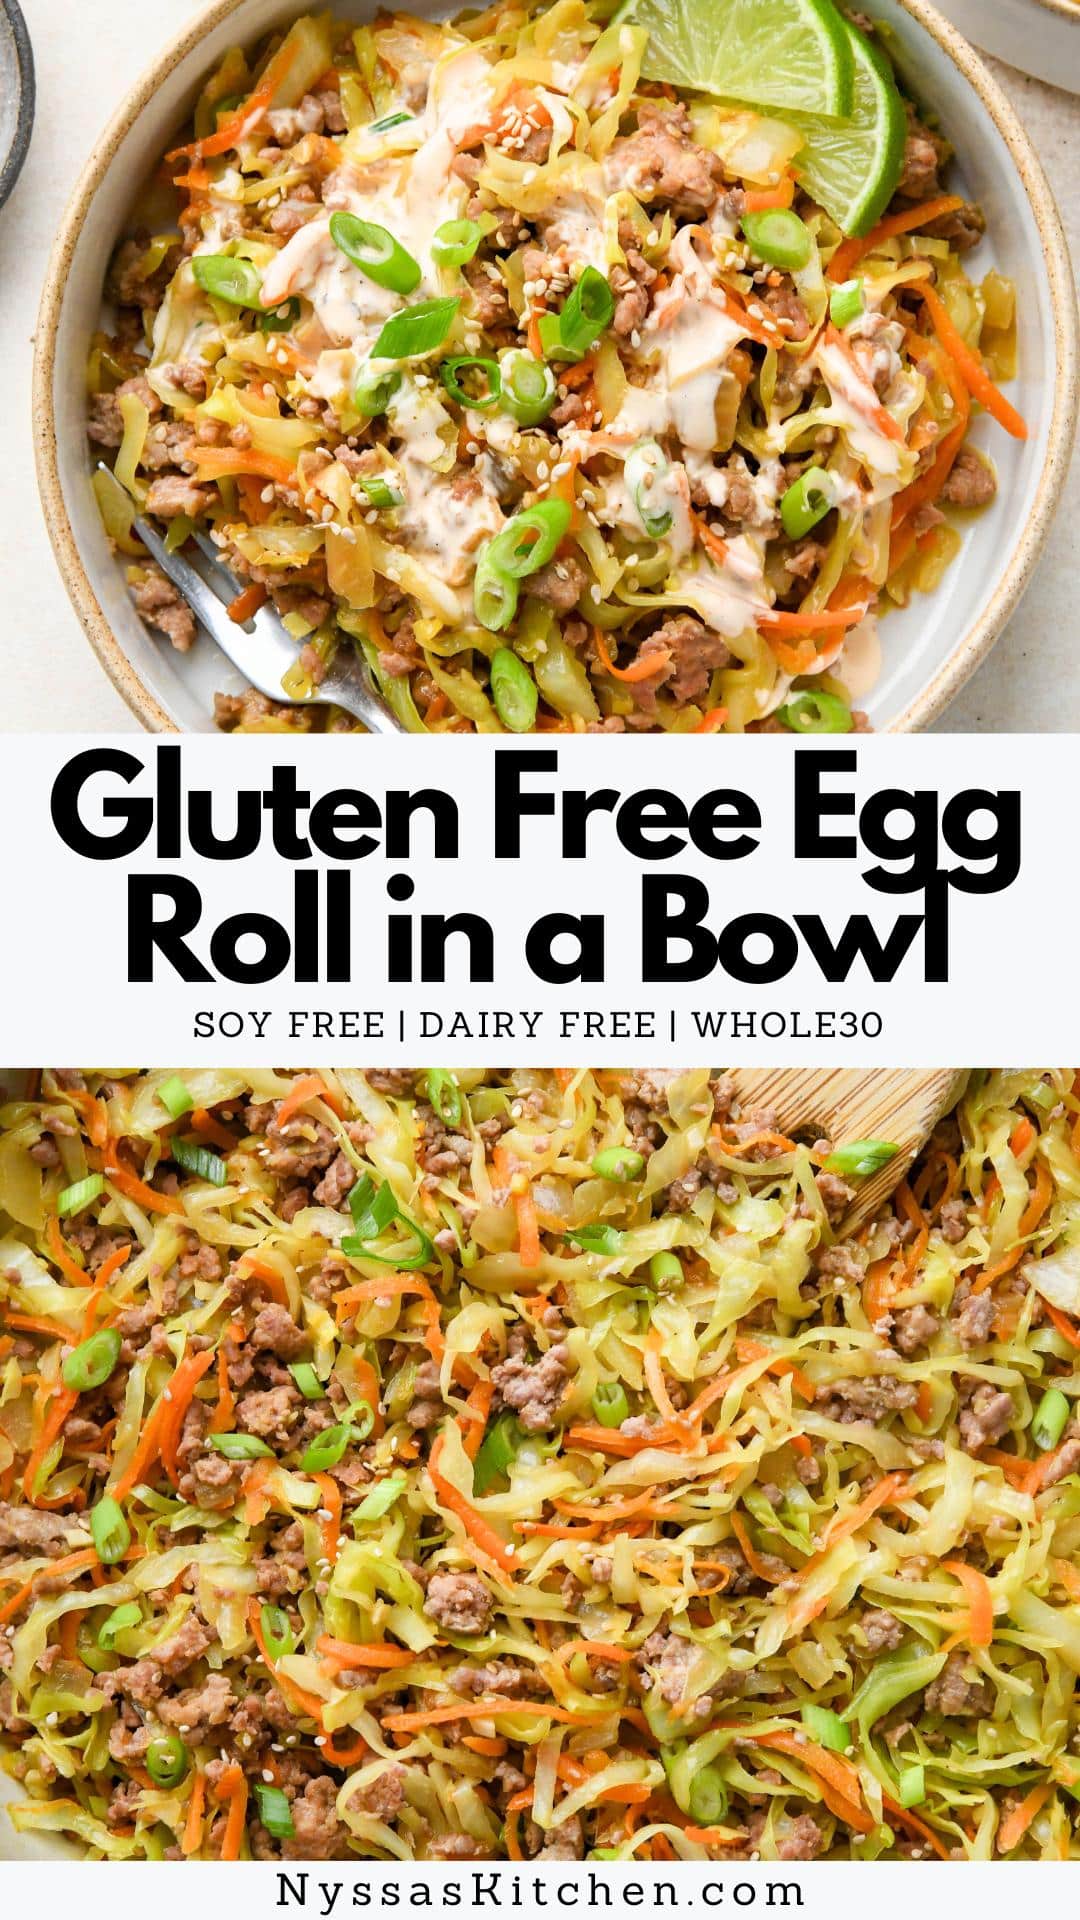 This gluten free egg roll in a bowl comes together in around 30 minutes in one skillet for the perfect weeknight dinner recipe! Made with ground turkey, shredded cabbage, carrots, a savory soy free sauce, and some irresistible garnishes. Easy to throw together and totally delicious! Whole30, gluten free, paleo.